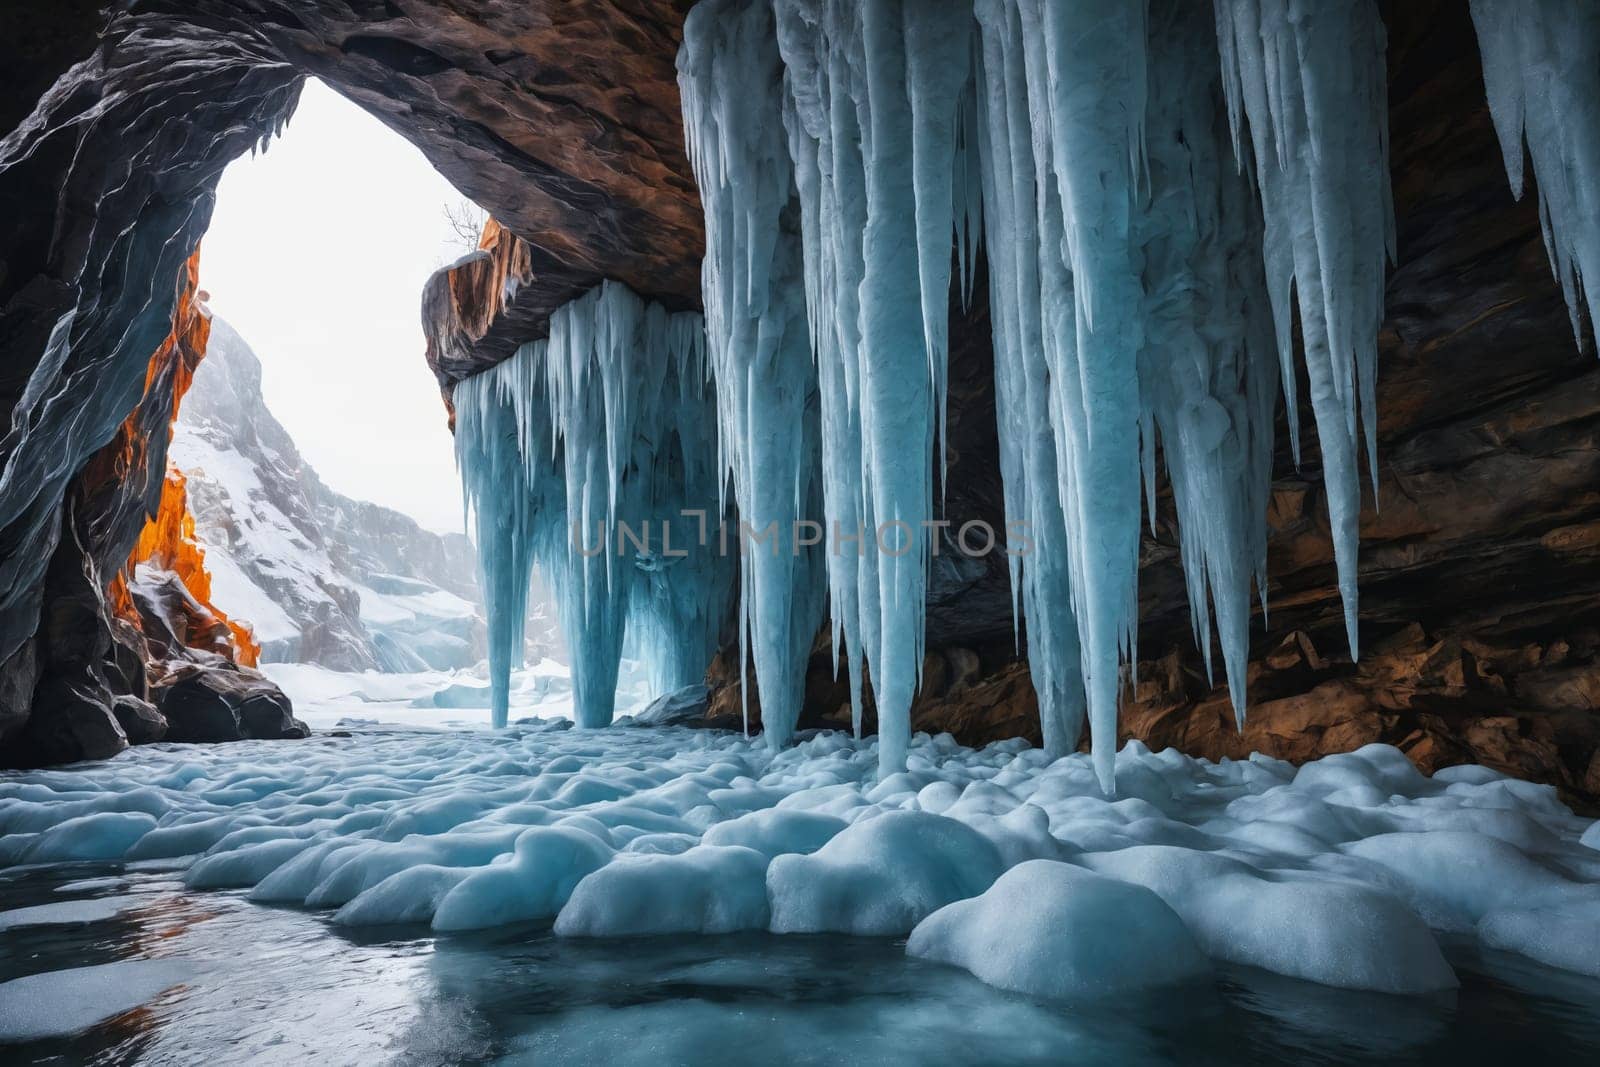 Discover an otherworldly cavern of large icicles in hues of blue and white, looming over a frozen lake. A scene capturing nature's cold artistry.